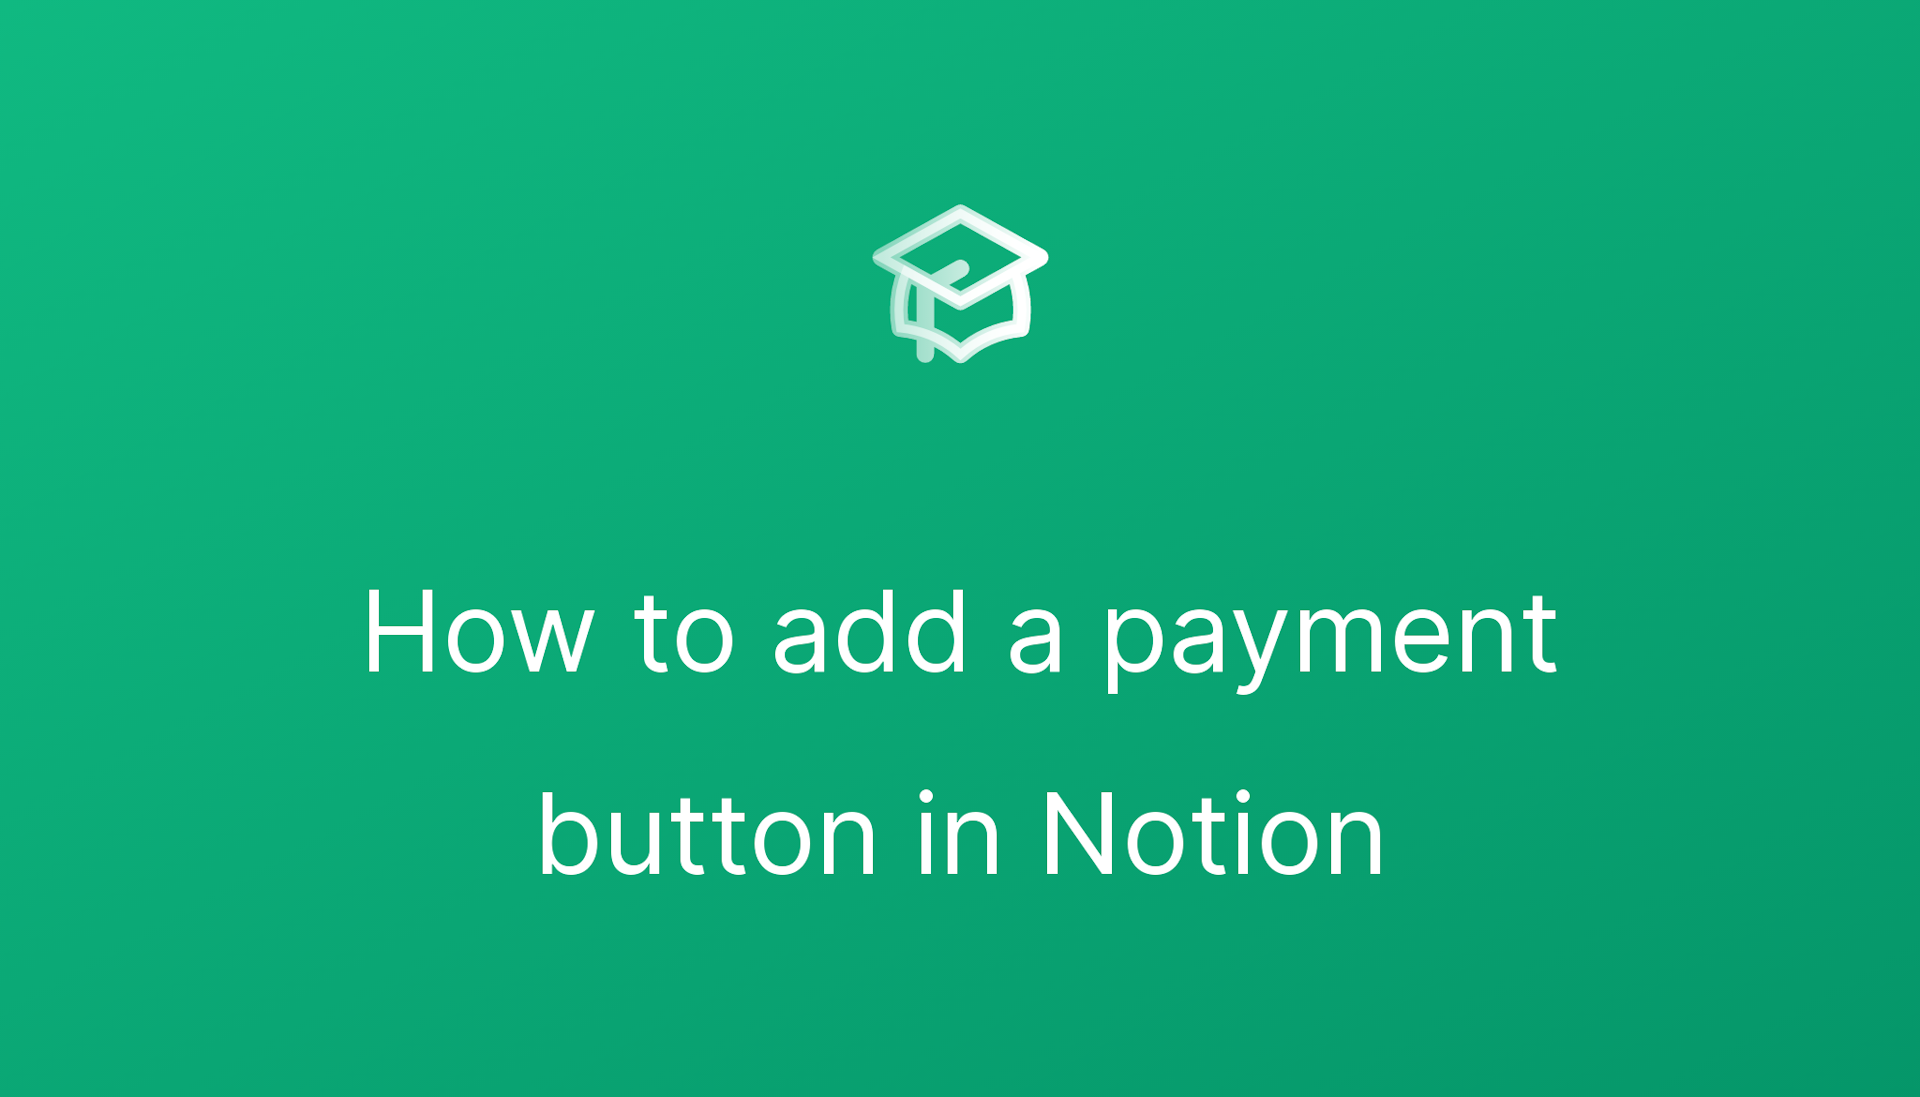 How to add a payment button in Notion